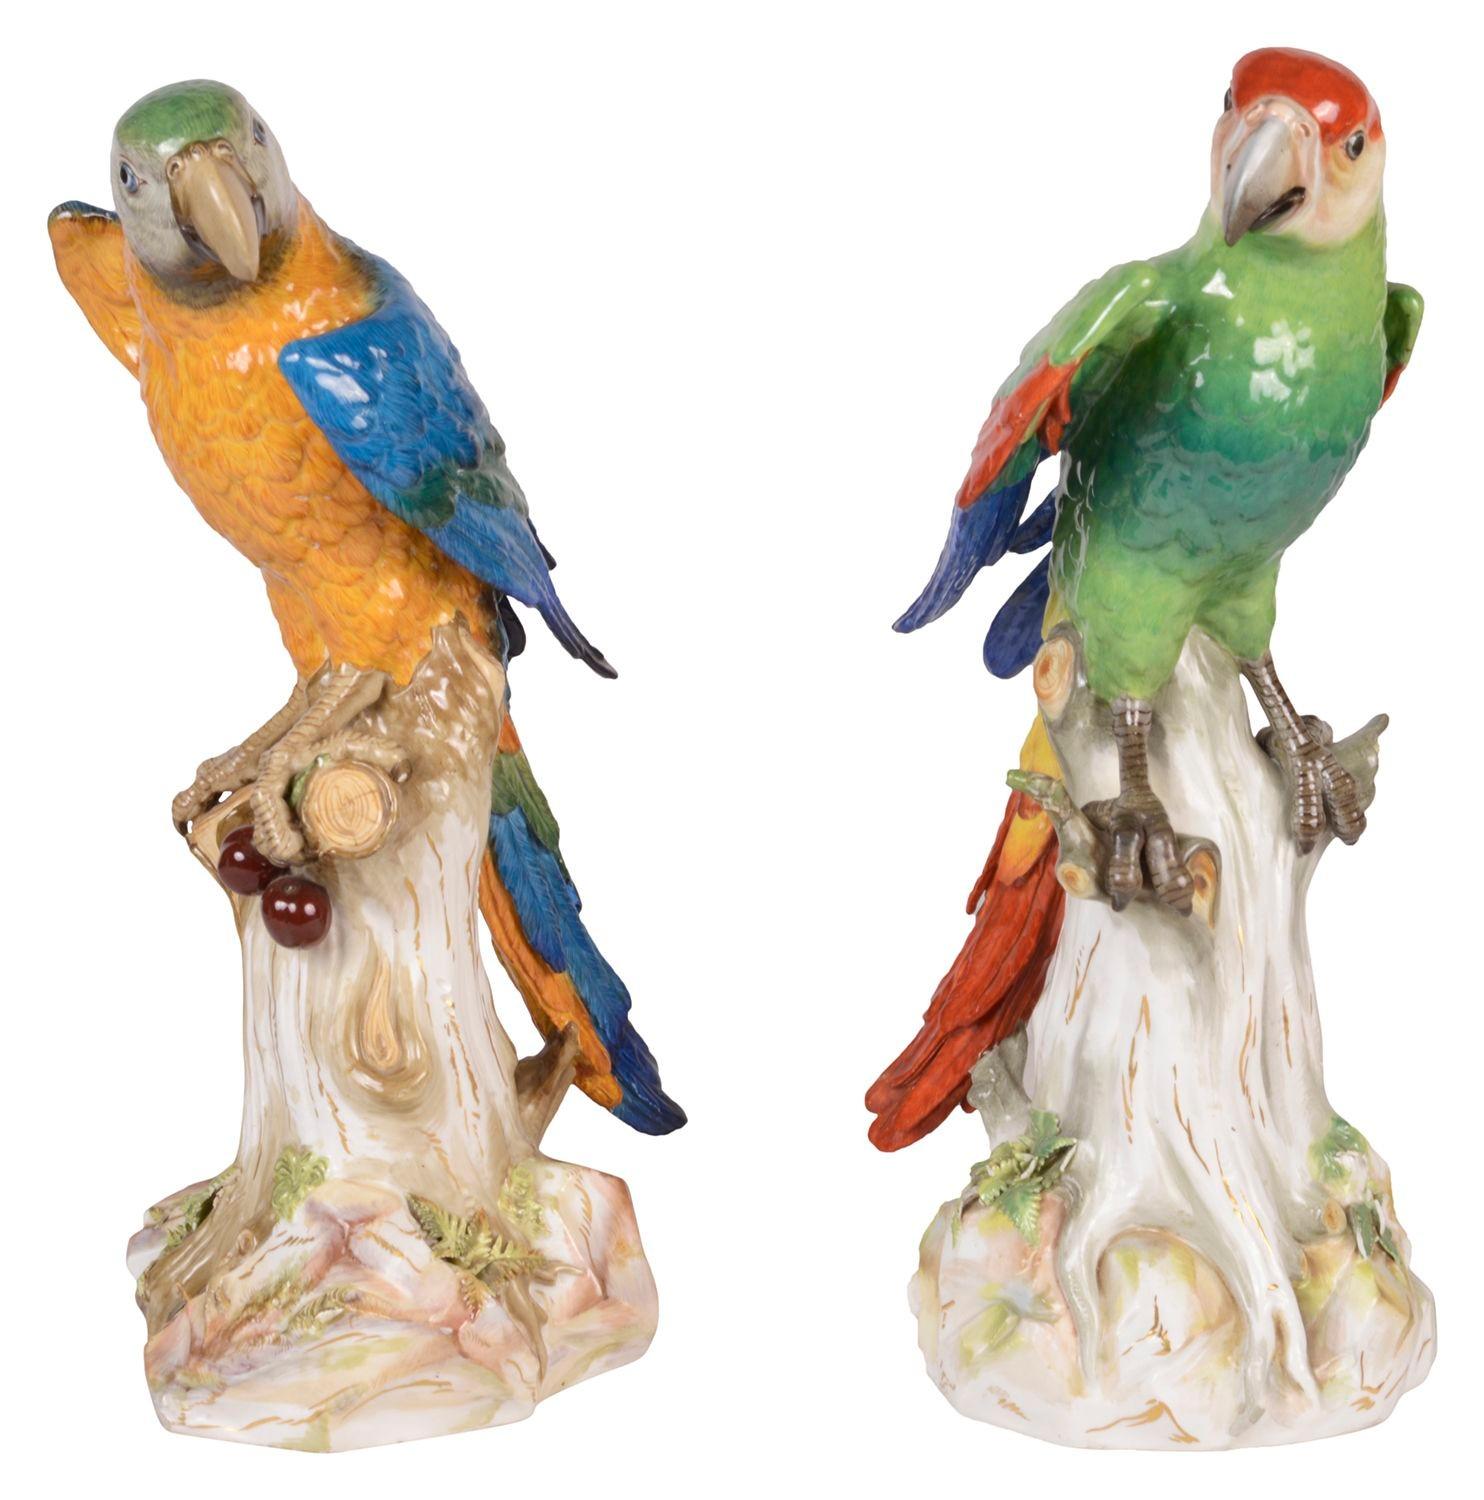 A large and impressive pair of wonderfully colourful, naturalistically modelled parrots one holding cherries in its foot, both perched on tree stumps.
Blue crossed swords to the underside. Measure: 43cm high.
 
Batch 7161800 TAKZN